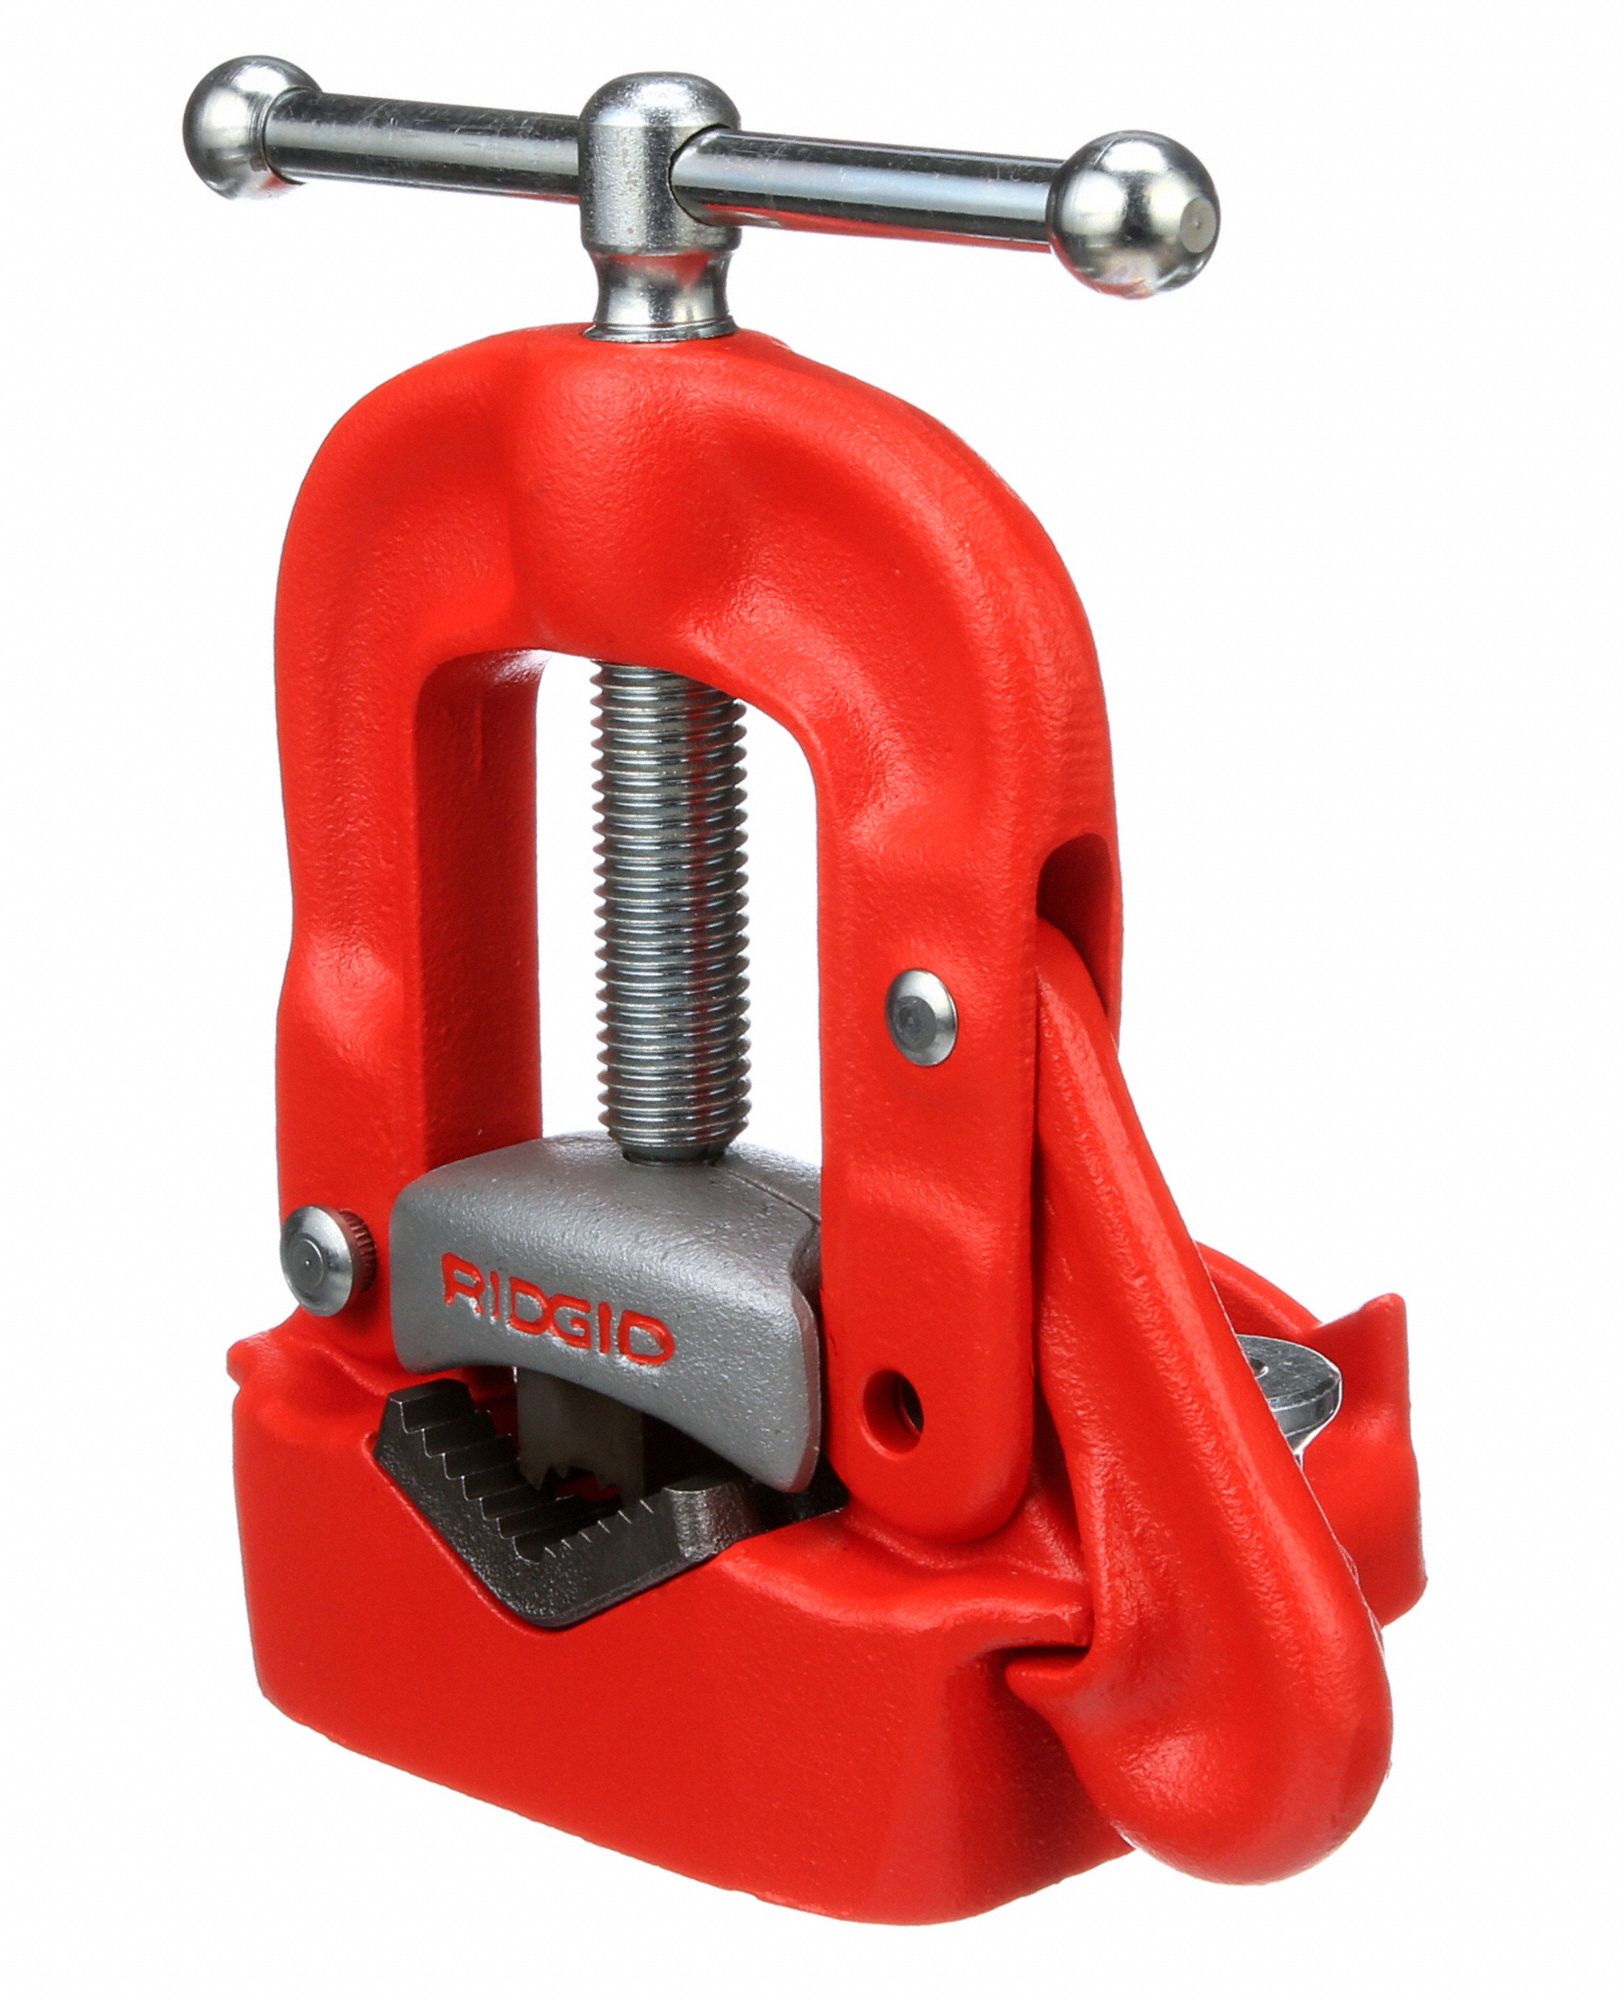 Ridgid 40080 1/8-Inch-to-2-Inch Capacity Bench Yoke Vise for sale online 